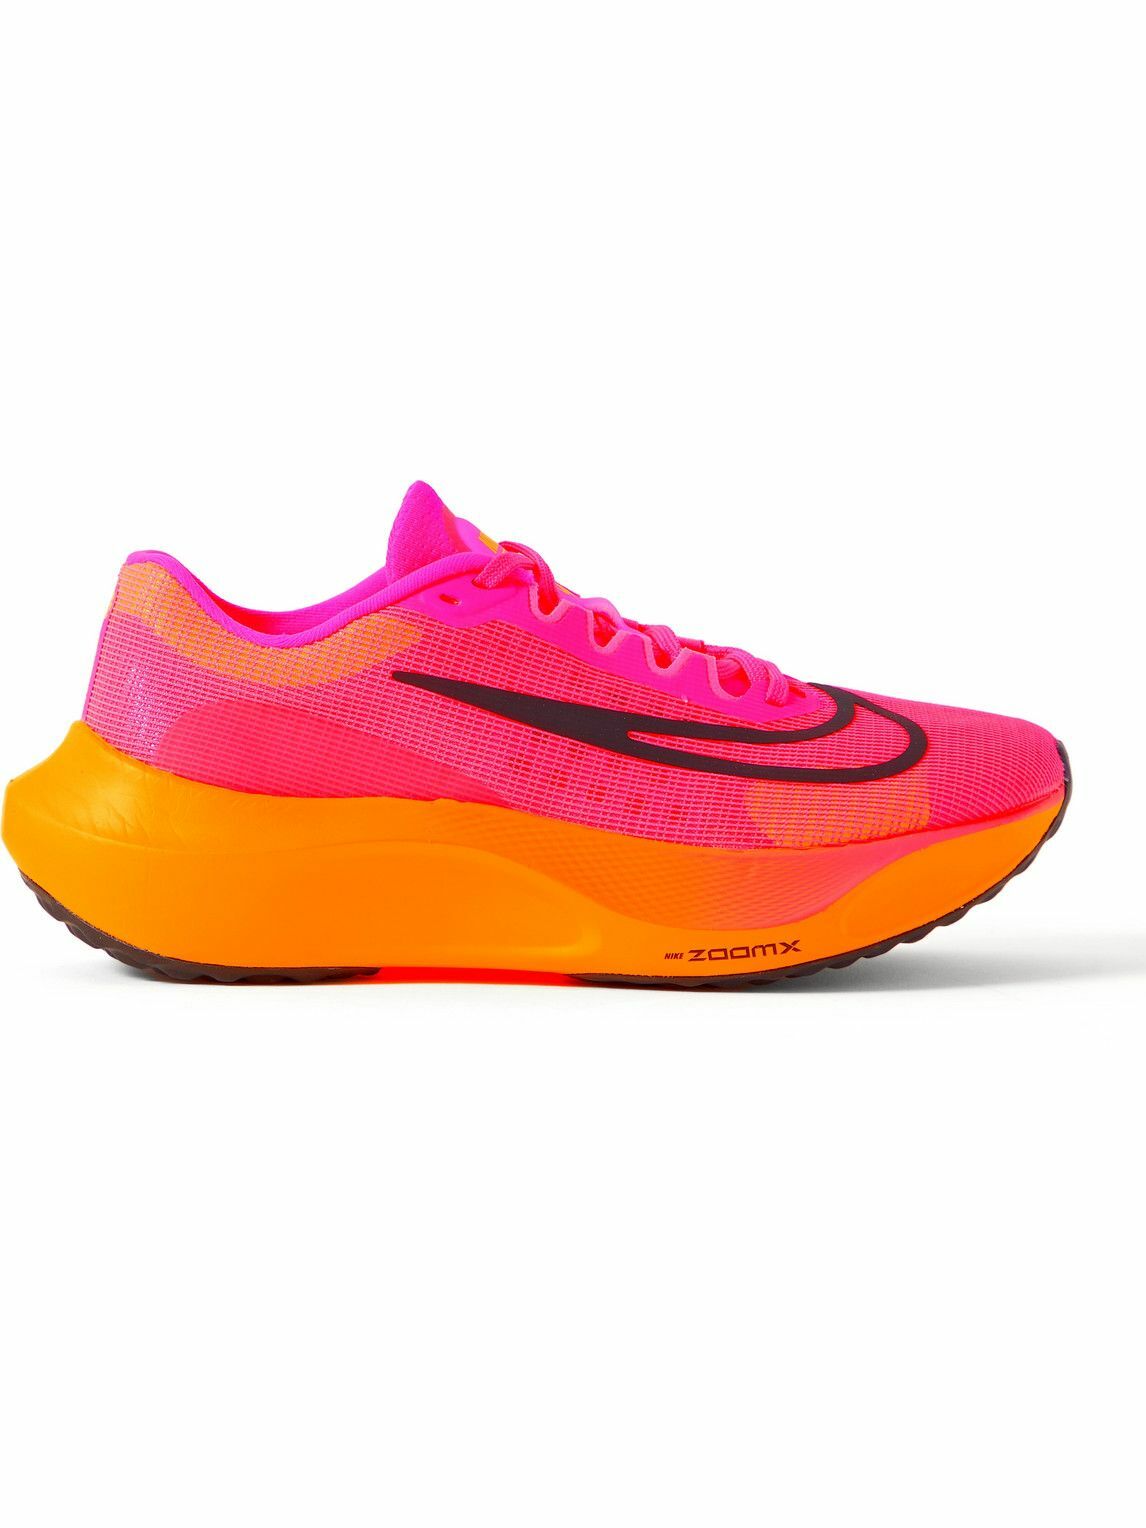 Nike Running - Zoom Fly 5 Rubber-Trimmed Neon Mesh Sneakers - Pink Nike ...